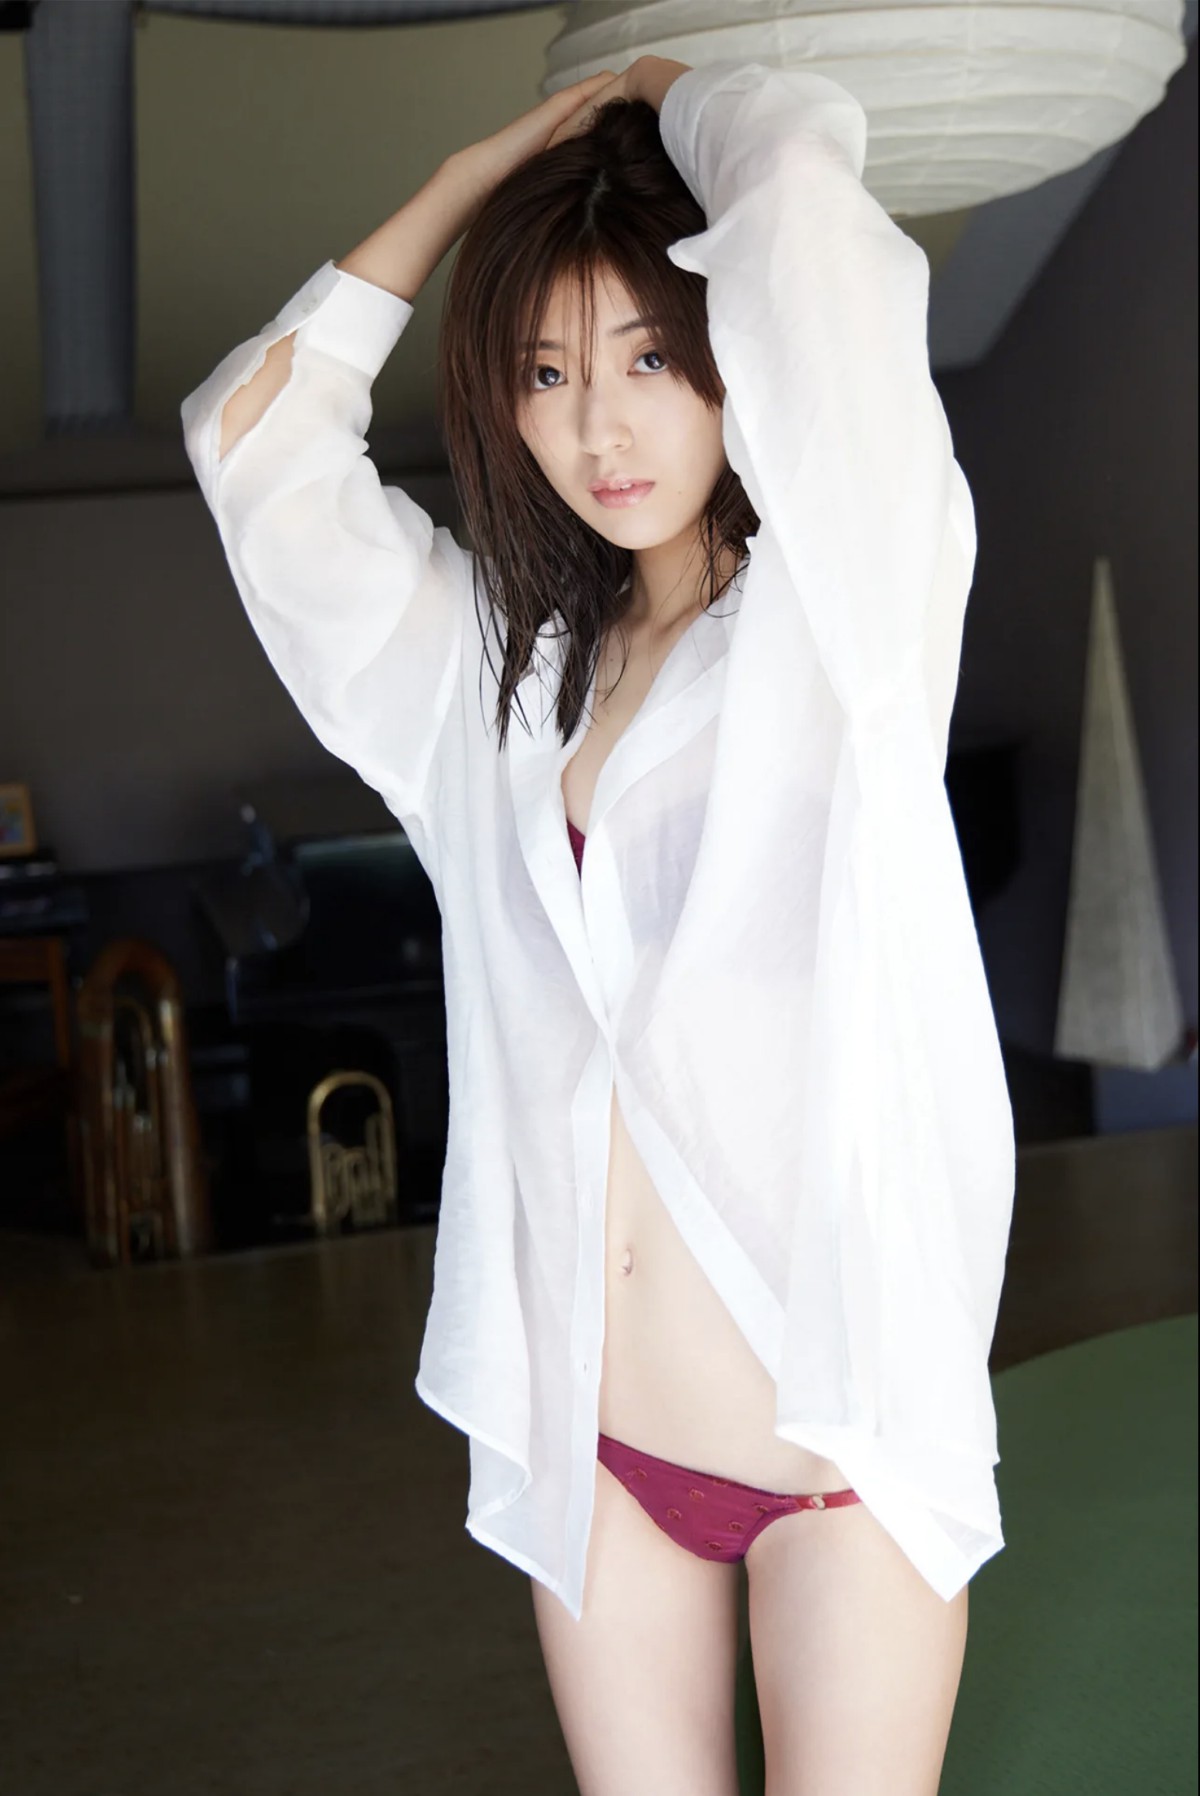 FRIDAYデジタル写真集 2021 03 10 Mio Kudo 工藤美桜 An Adult Sexy That Fascinates You For The First Time 0065 2429808059.jpg